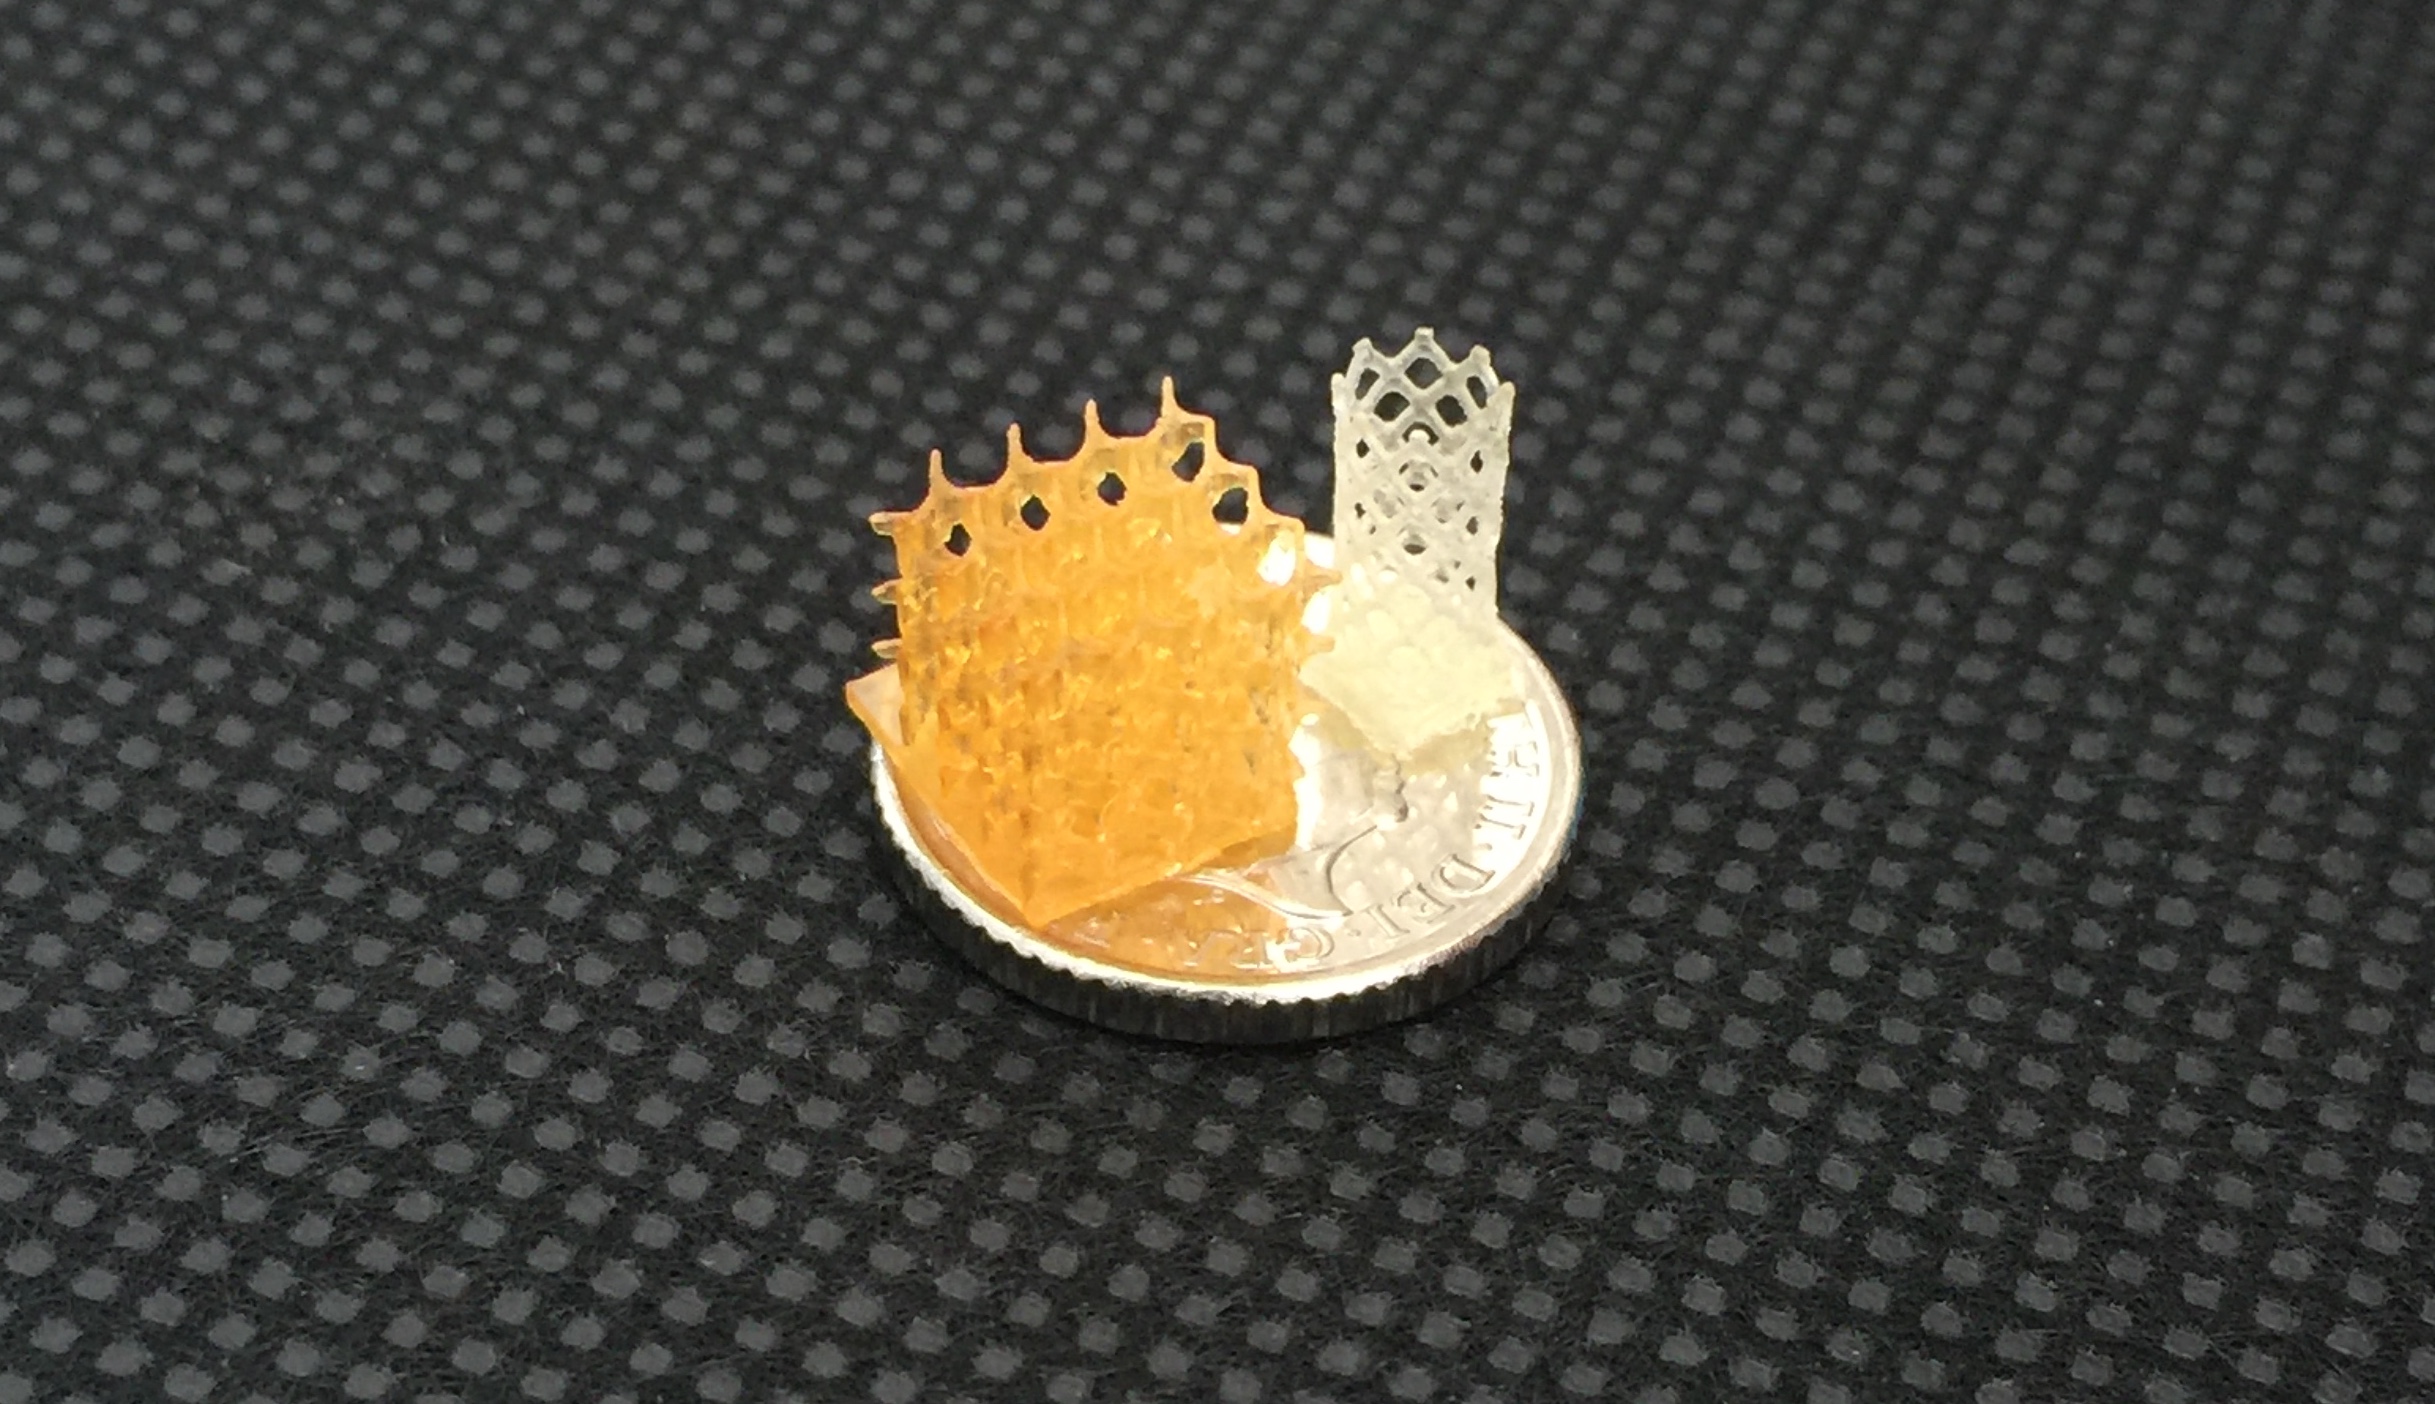 4D Biomaterials's 4Degra printed in a honeycomb structure. Photo via 4D Biomaterials.